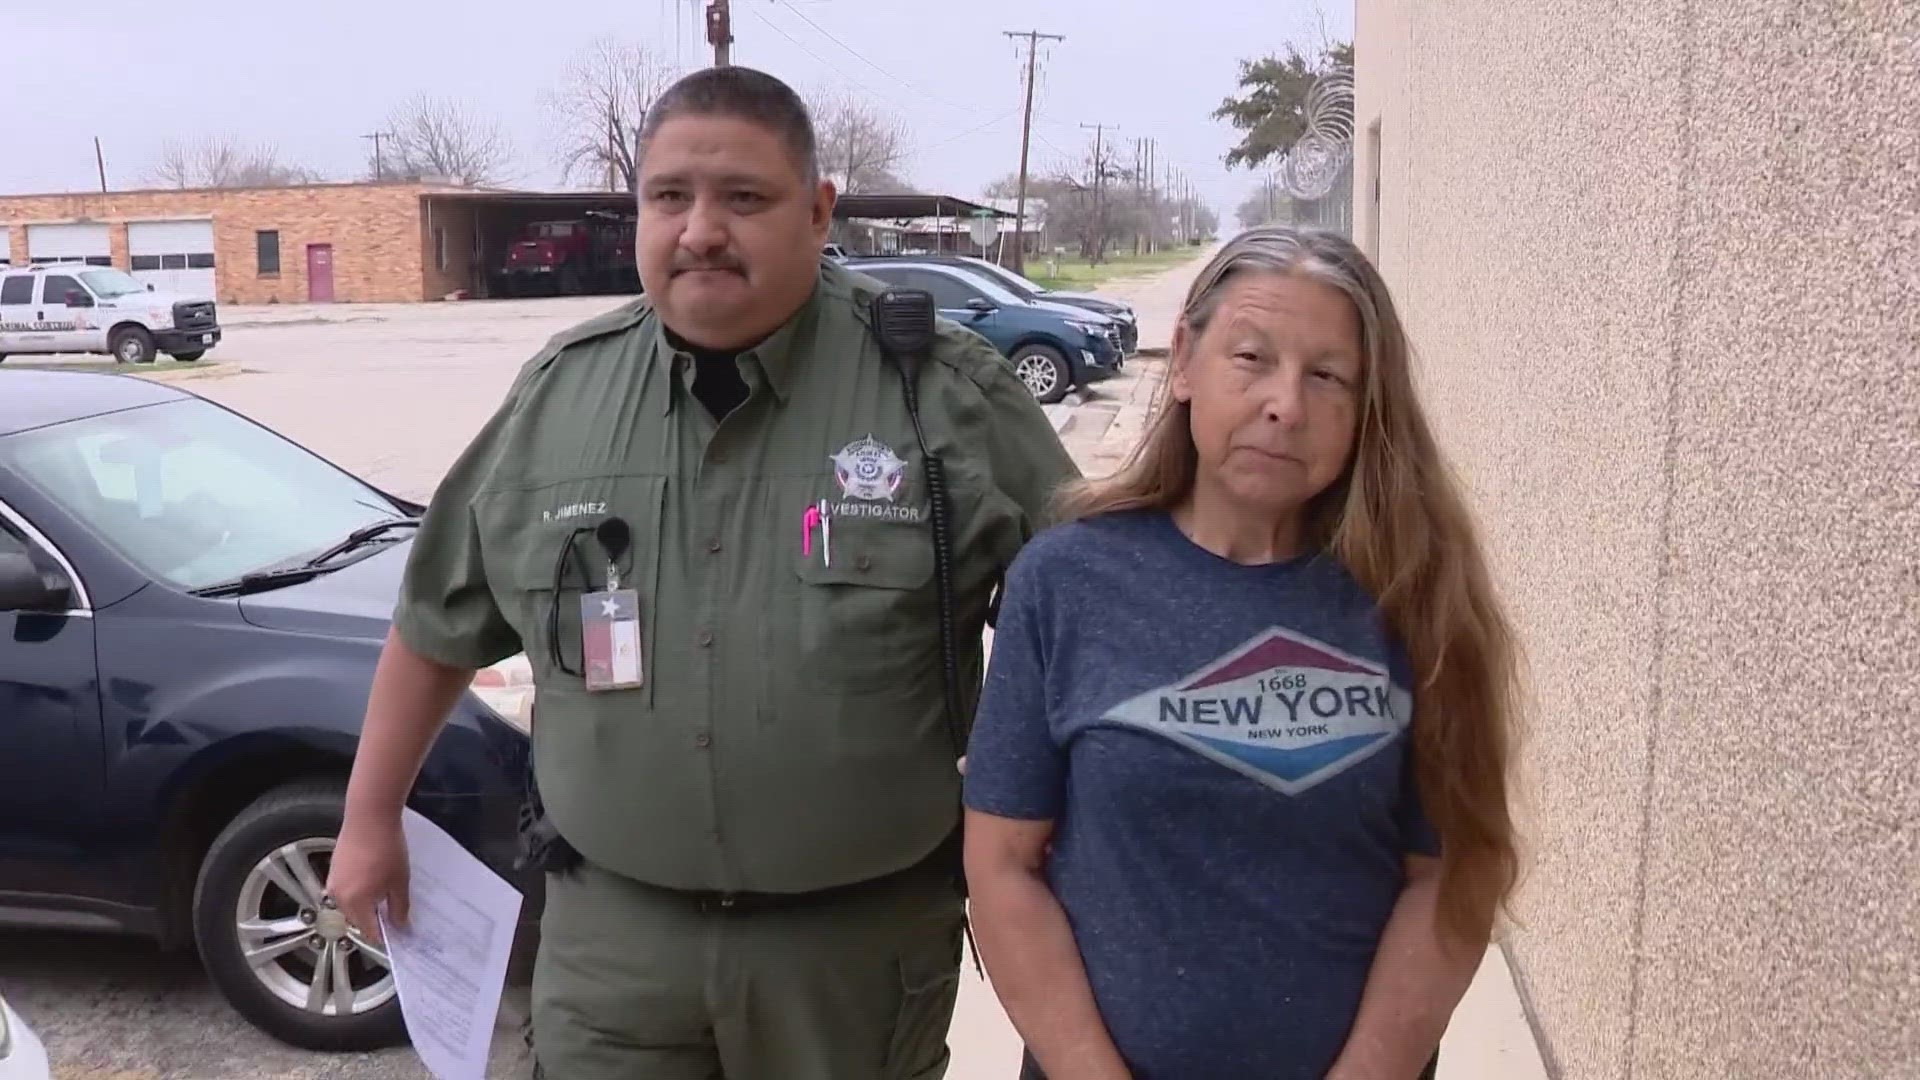 Patricia Stone surrendered herself to an Atascosa County Animal Control unit Wednesday morning at the Atascosa County Sheriff’s Office and Jail.